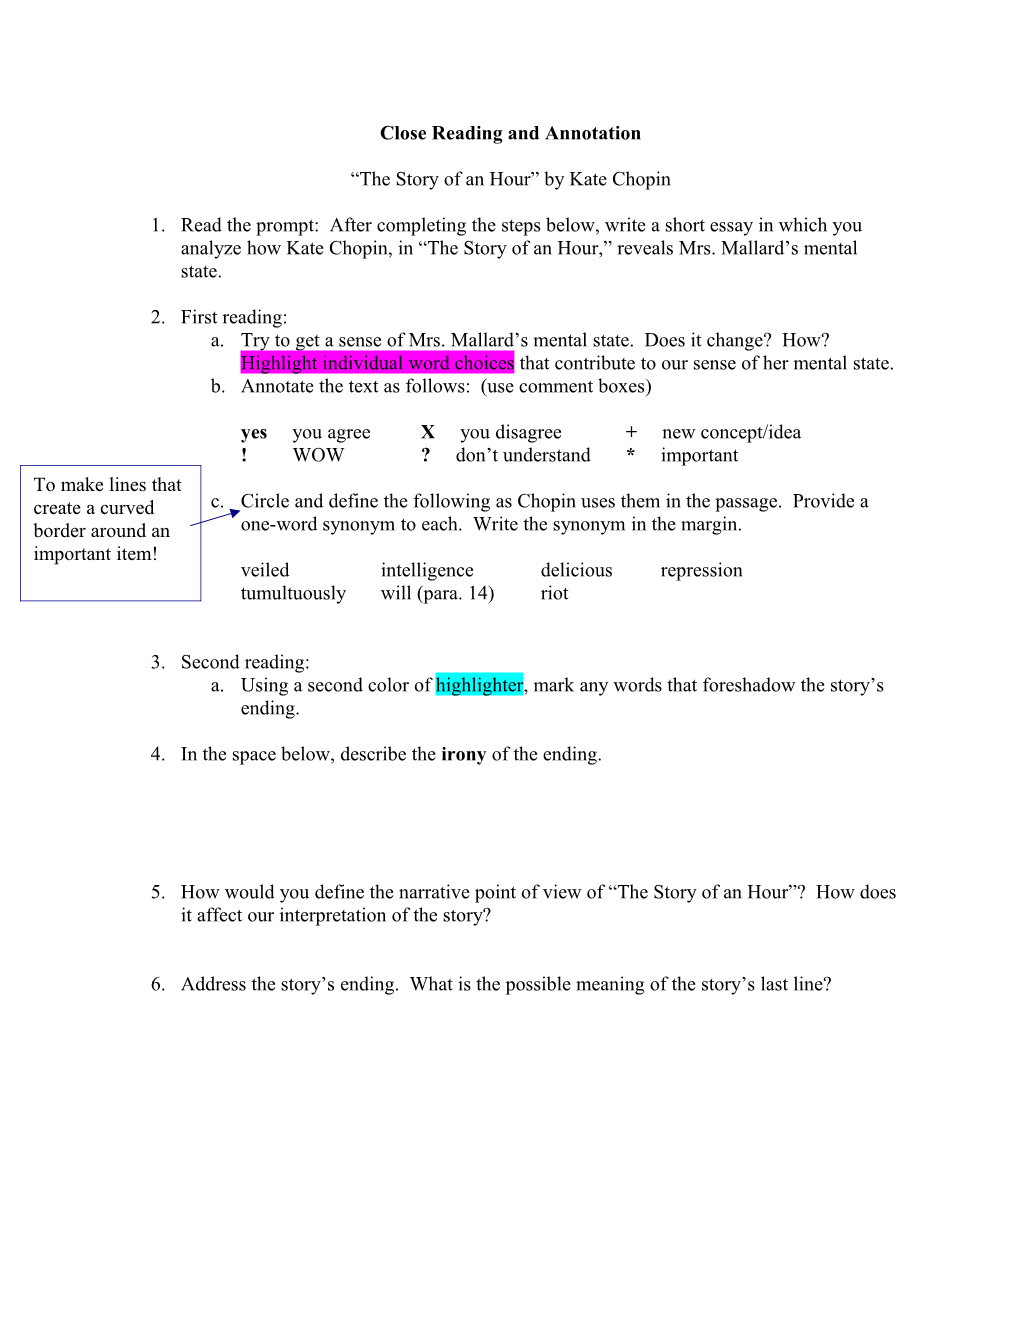 Close Reading and Annotation